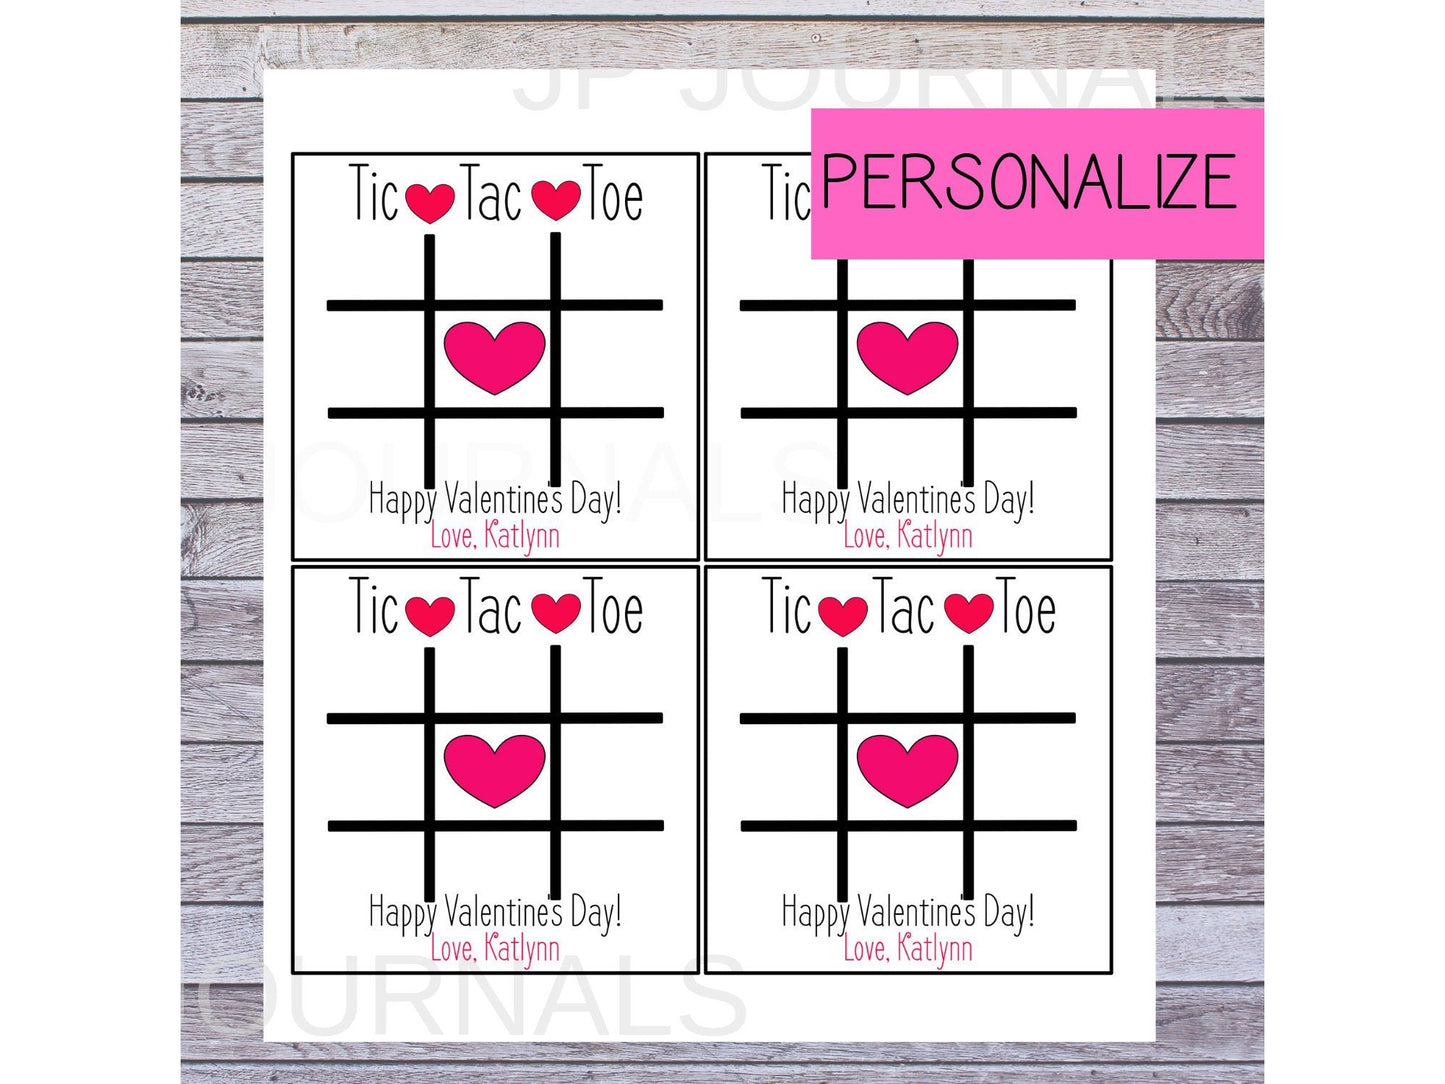 PERSONALIZED Valentine's Day Printable Tic Tac Toe Game Activity Card DIY Printable Valentines Day Card (Great for Kids and School Parties)